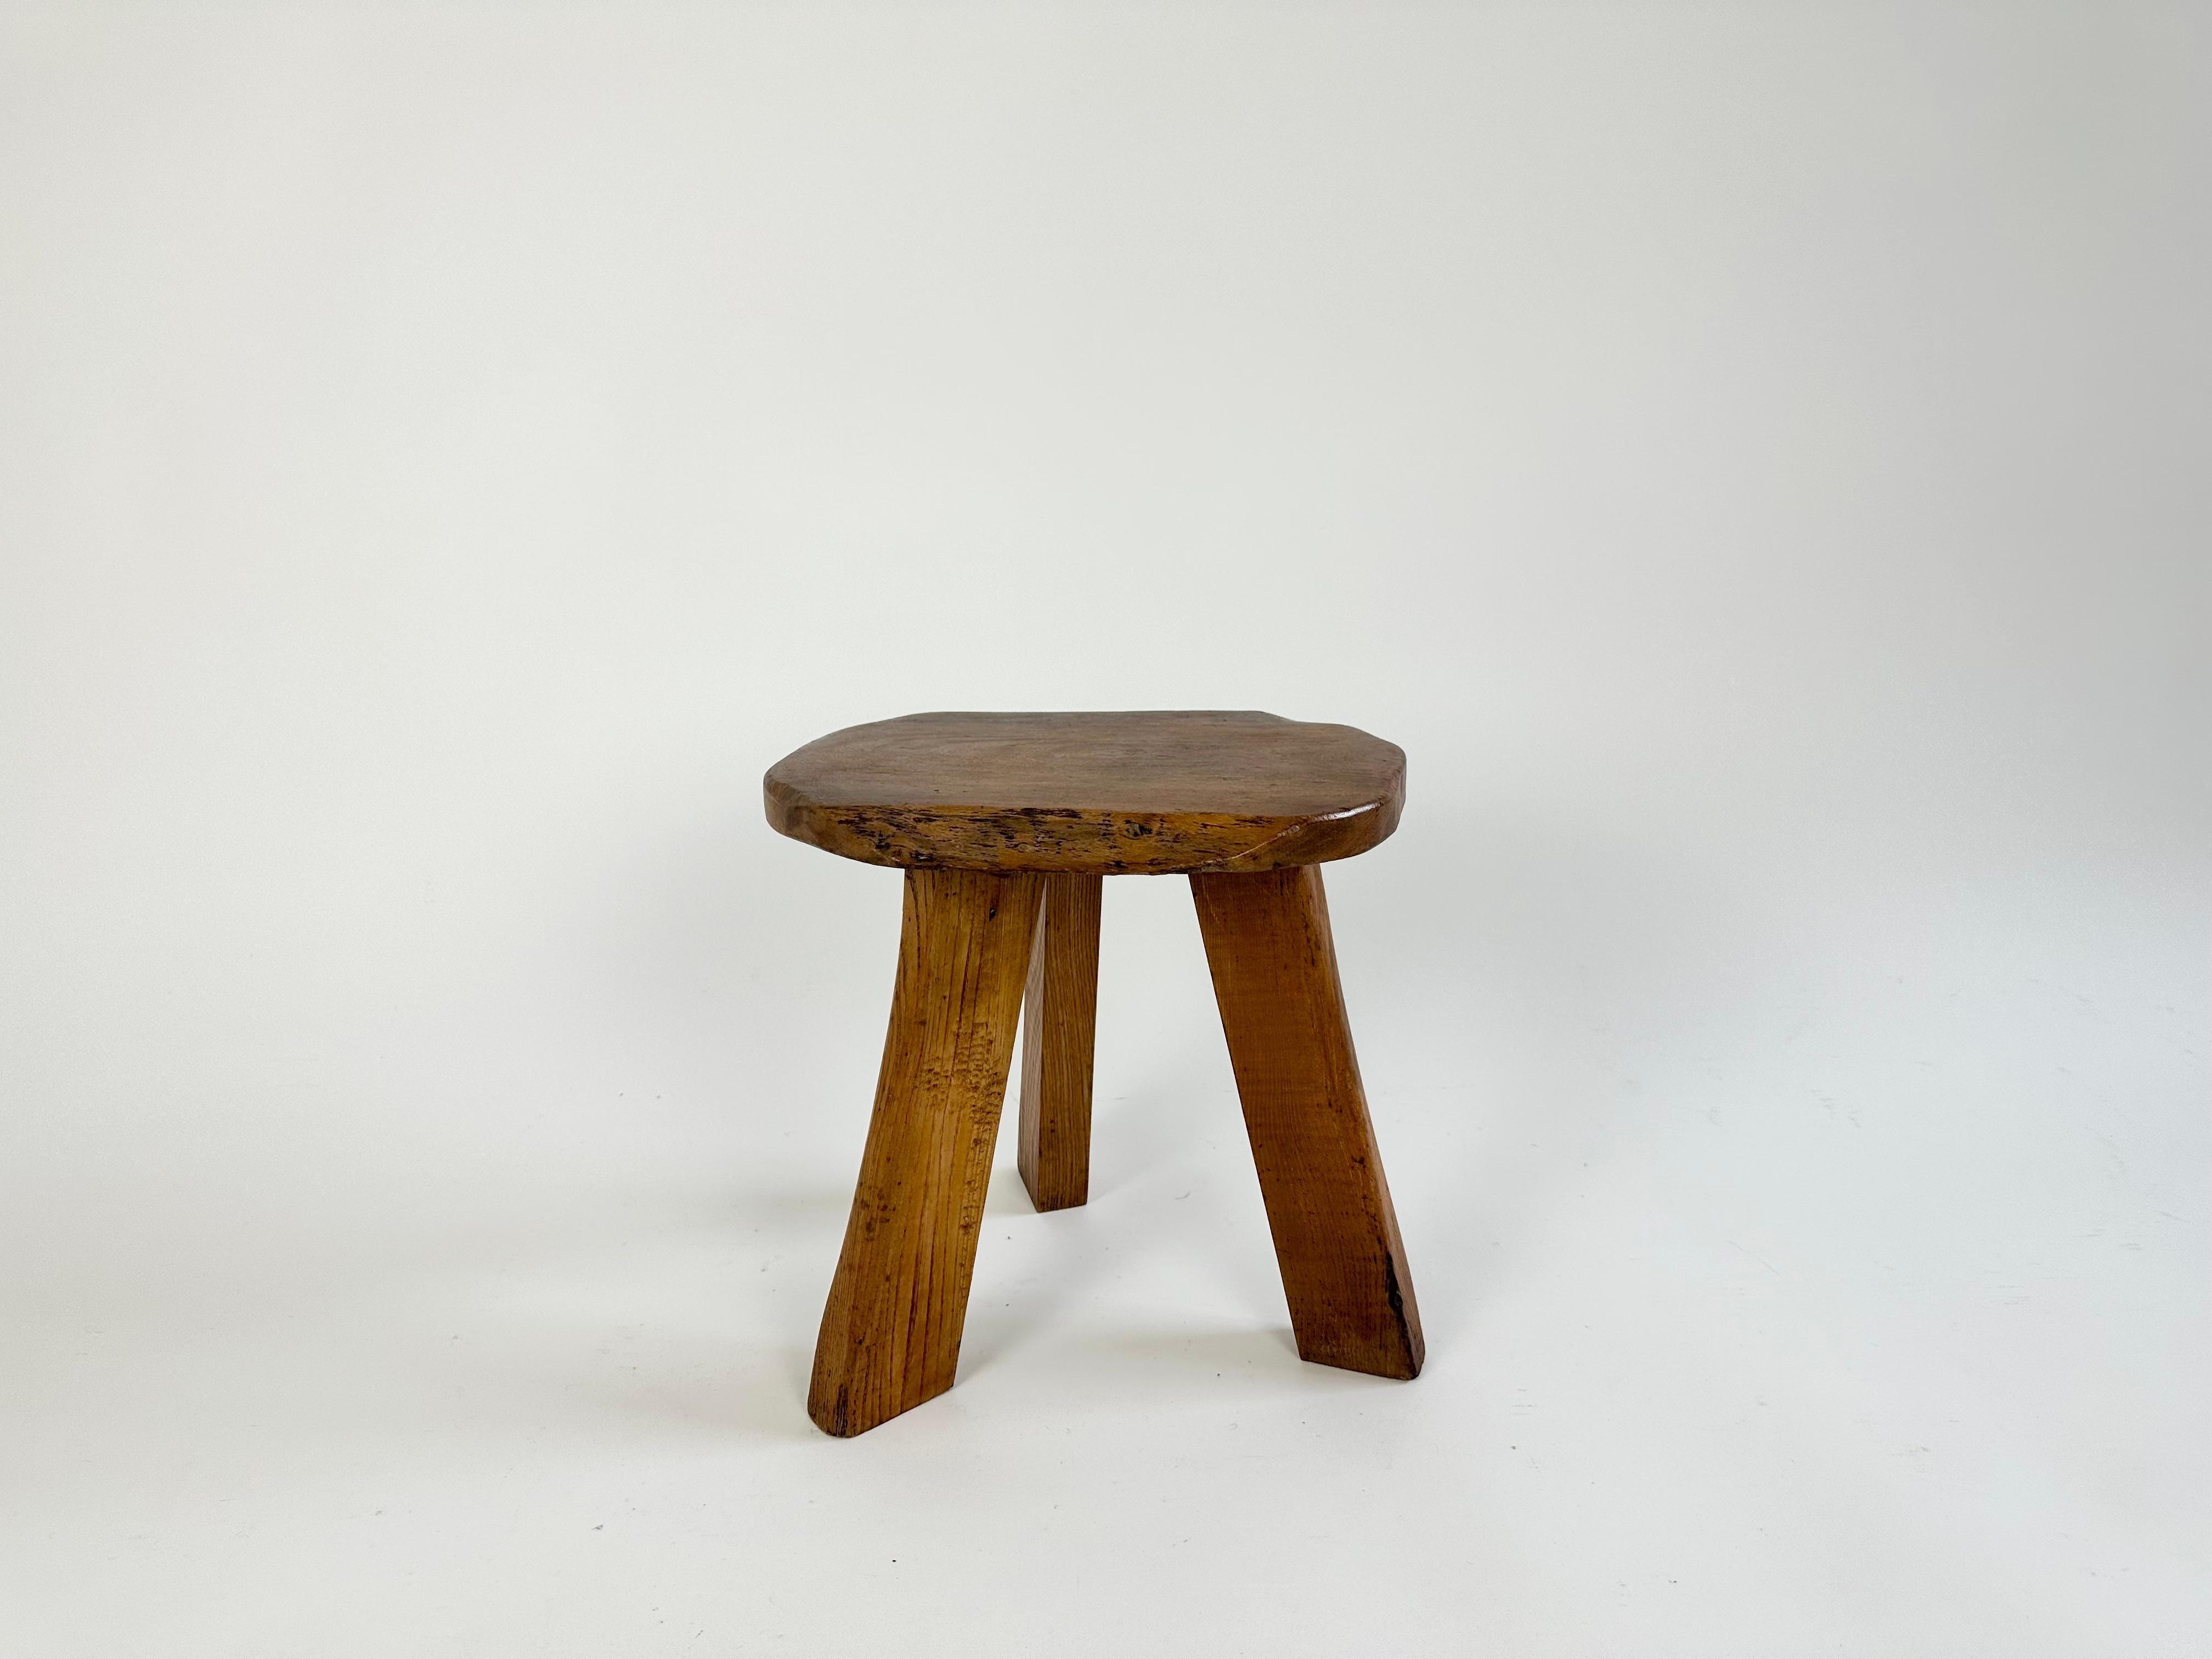 Vintage primitive low stool, England c.1950-60

Rustic brutalist syle. 

Great patina with signs of age as pictured, no damage or old repairs. Cleaned, ready for use.

Ideal for use as a low side table

Worldwide shipping

